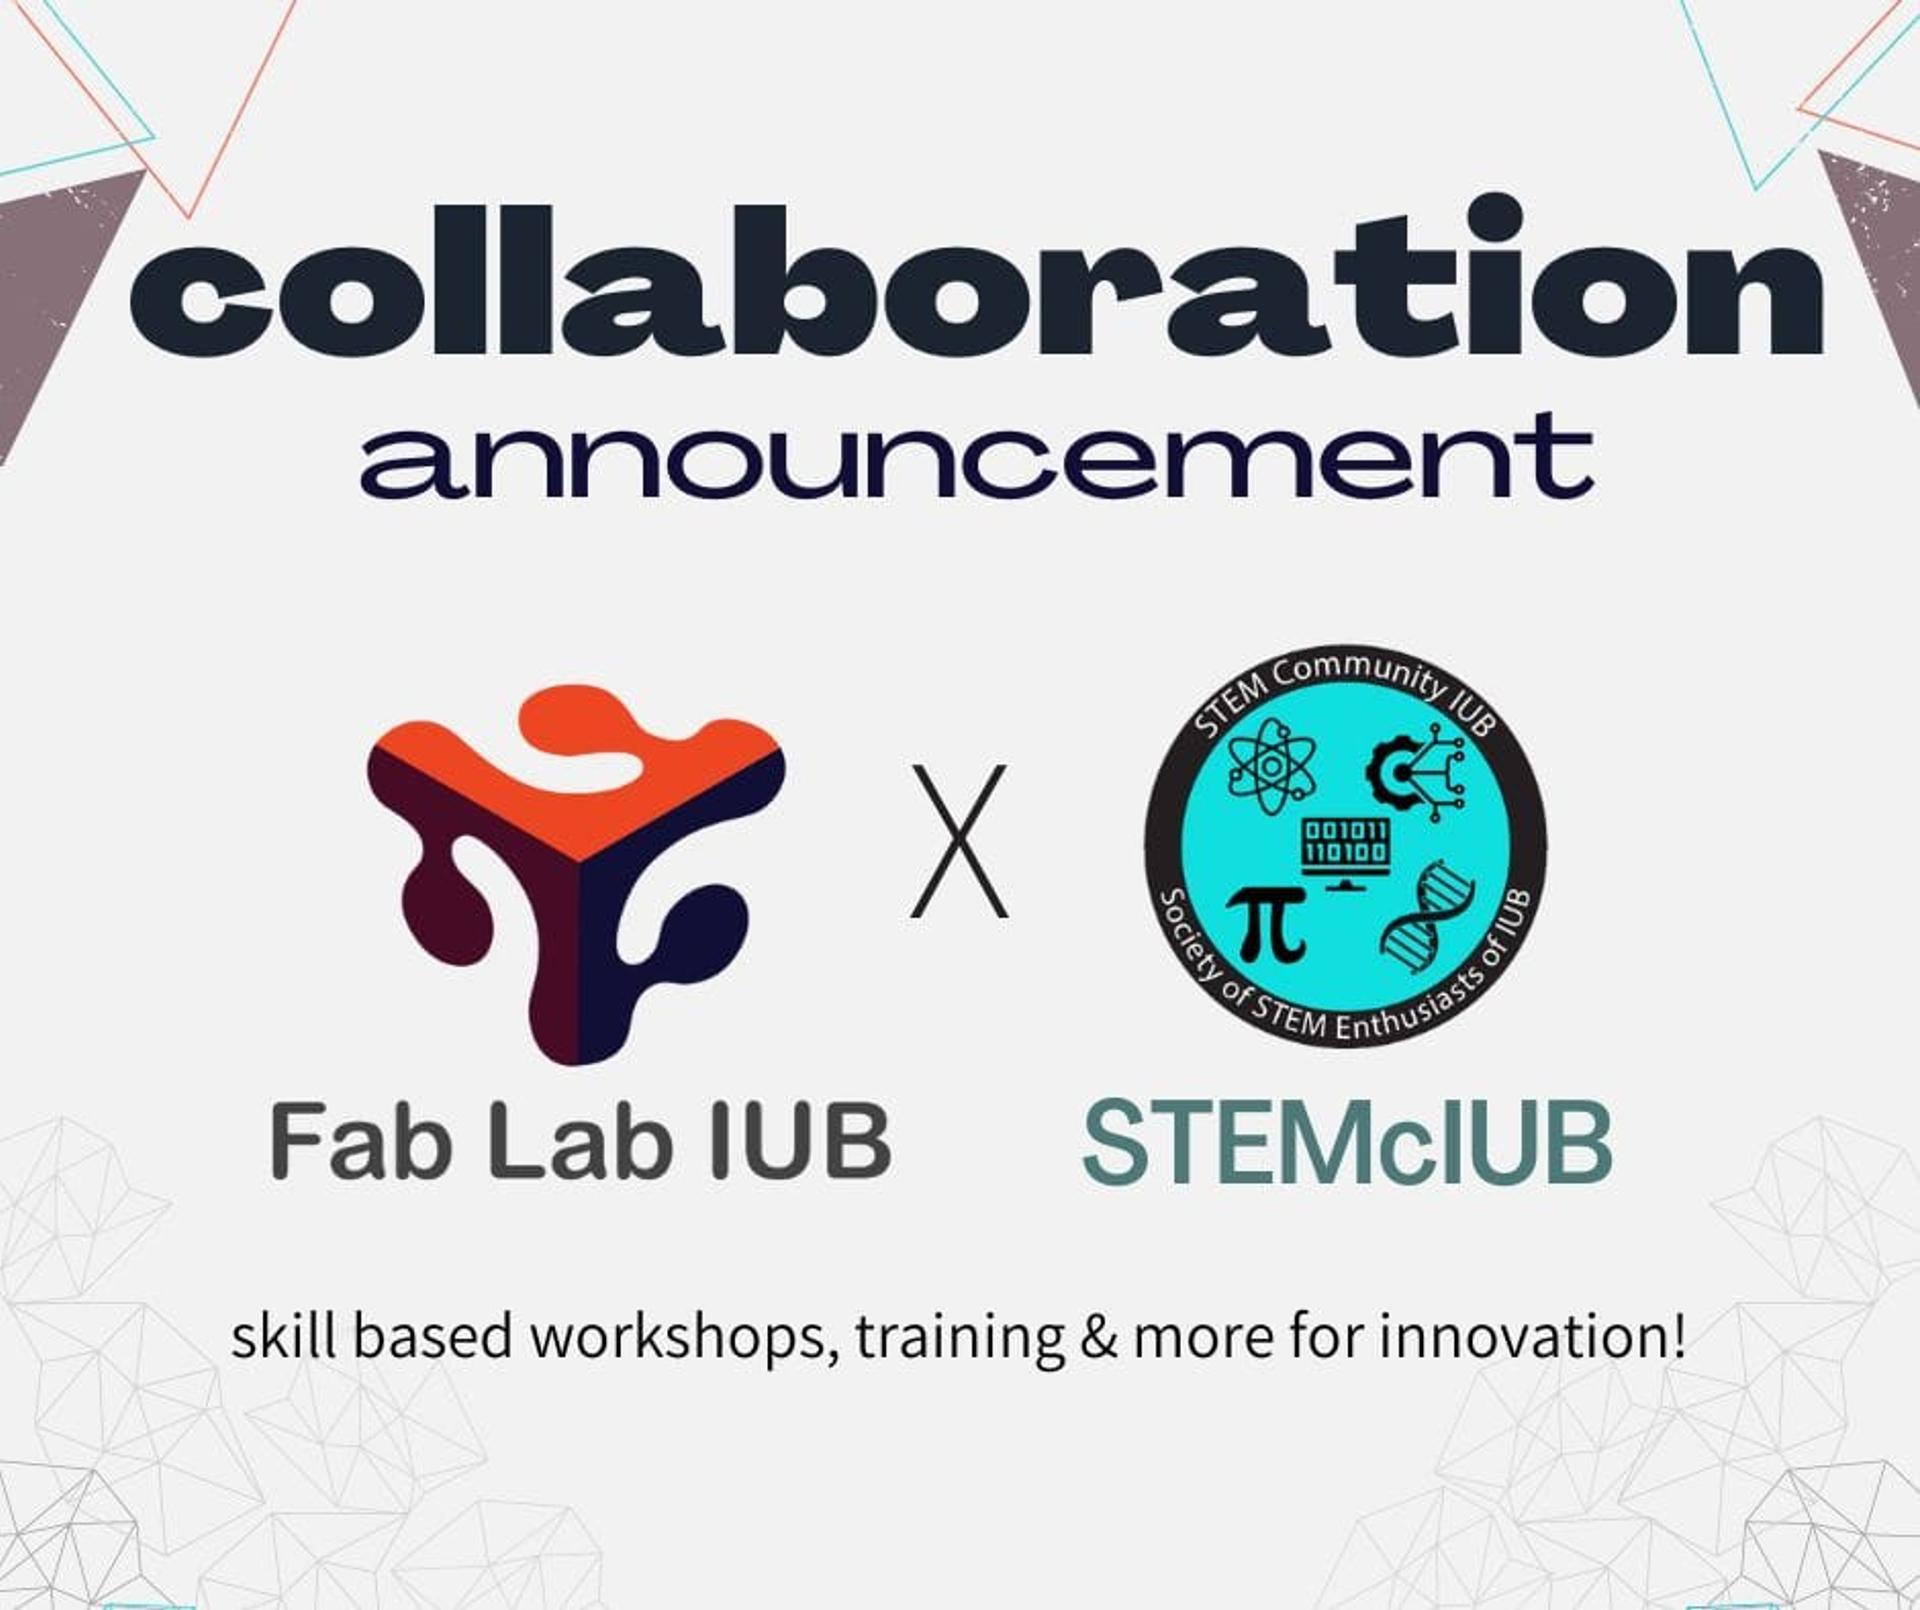 STEMcIUB is Collaborating with Fab Lab IUB as a Learning Partner